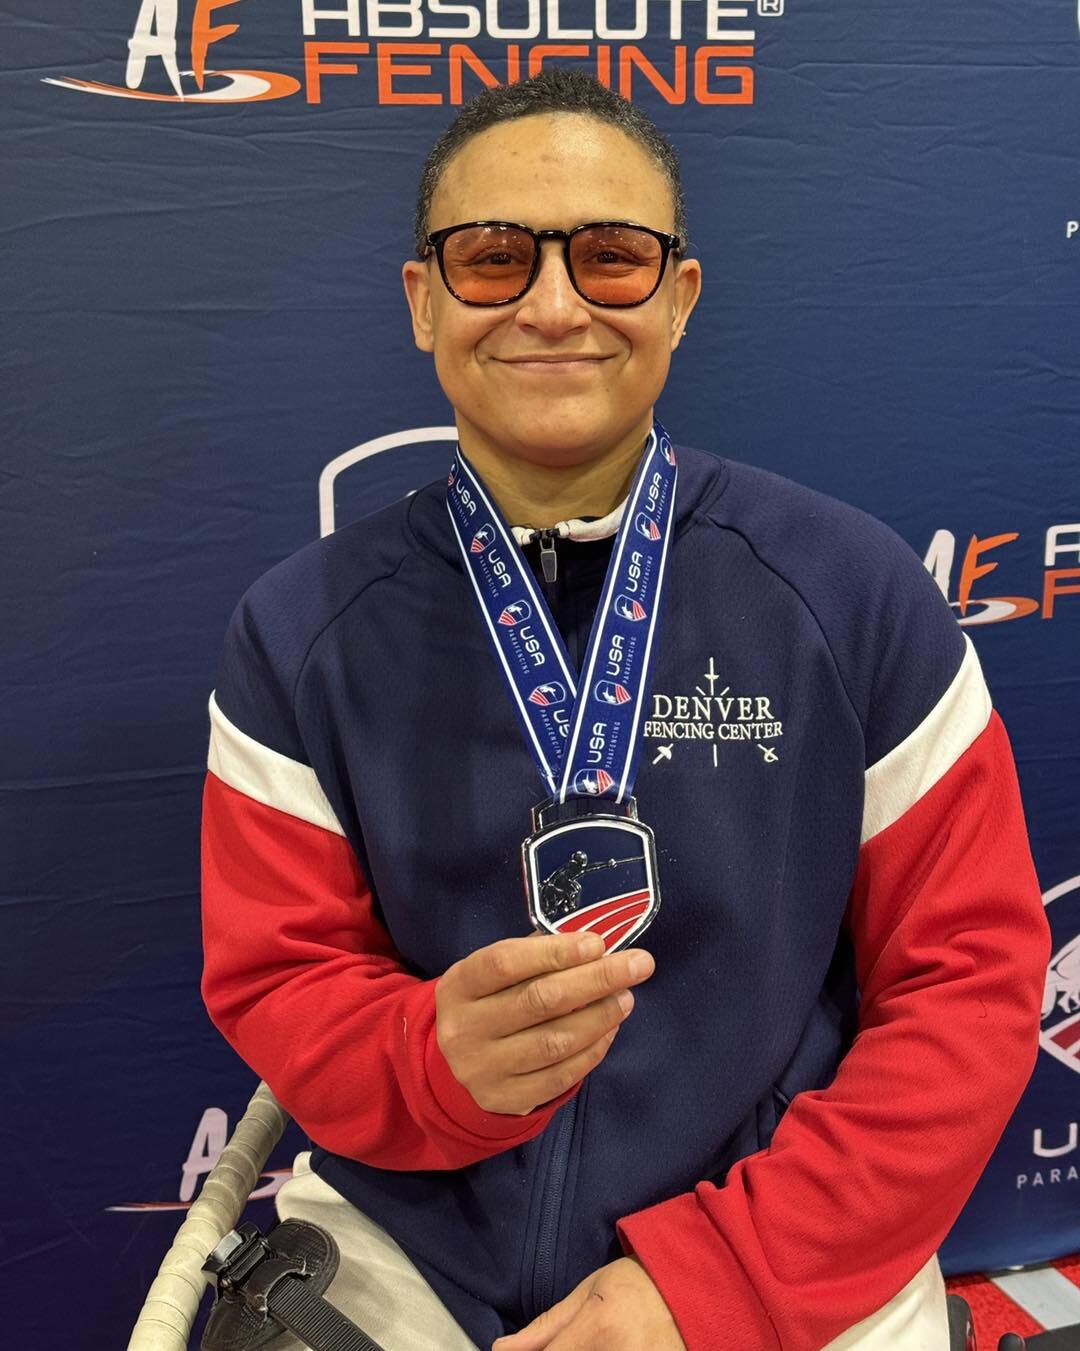 Jataya Taylor won her 2nd medal of the weekend, earning 🥈 the Silver Medal in Para Women&rsquo;s Foil. 

#denverfencing #denverfencingcenter #denvercolorado #usafencing #denver #fencing #foil #womenfoil #parafencing